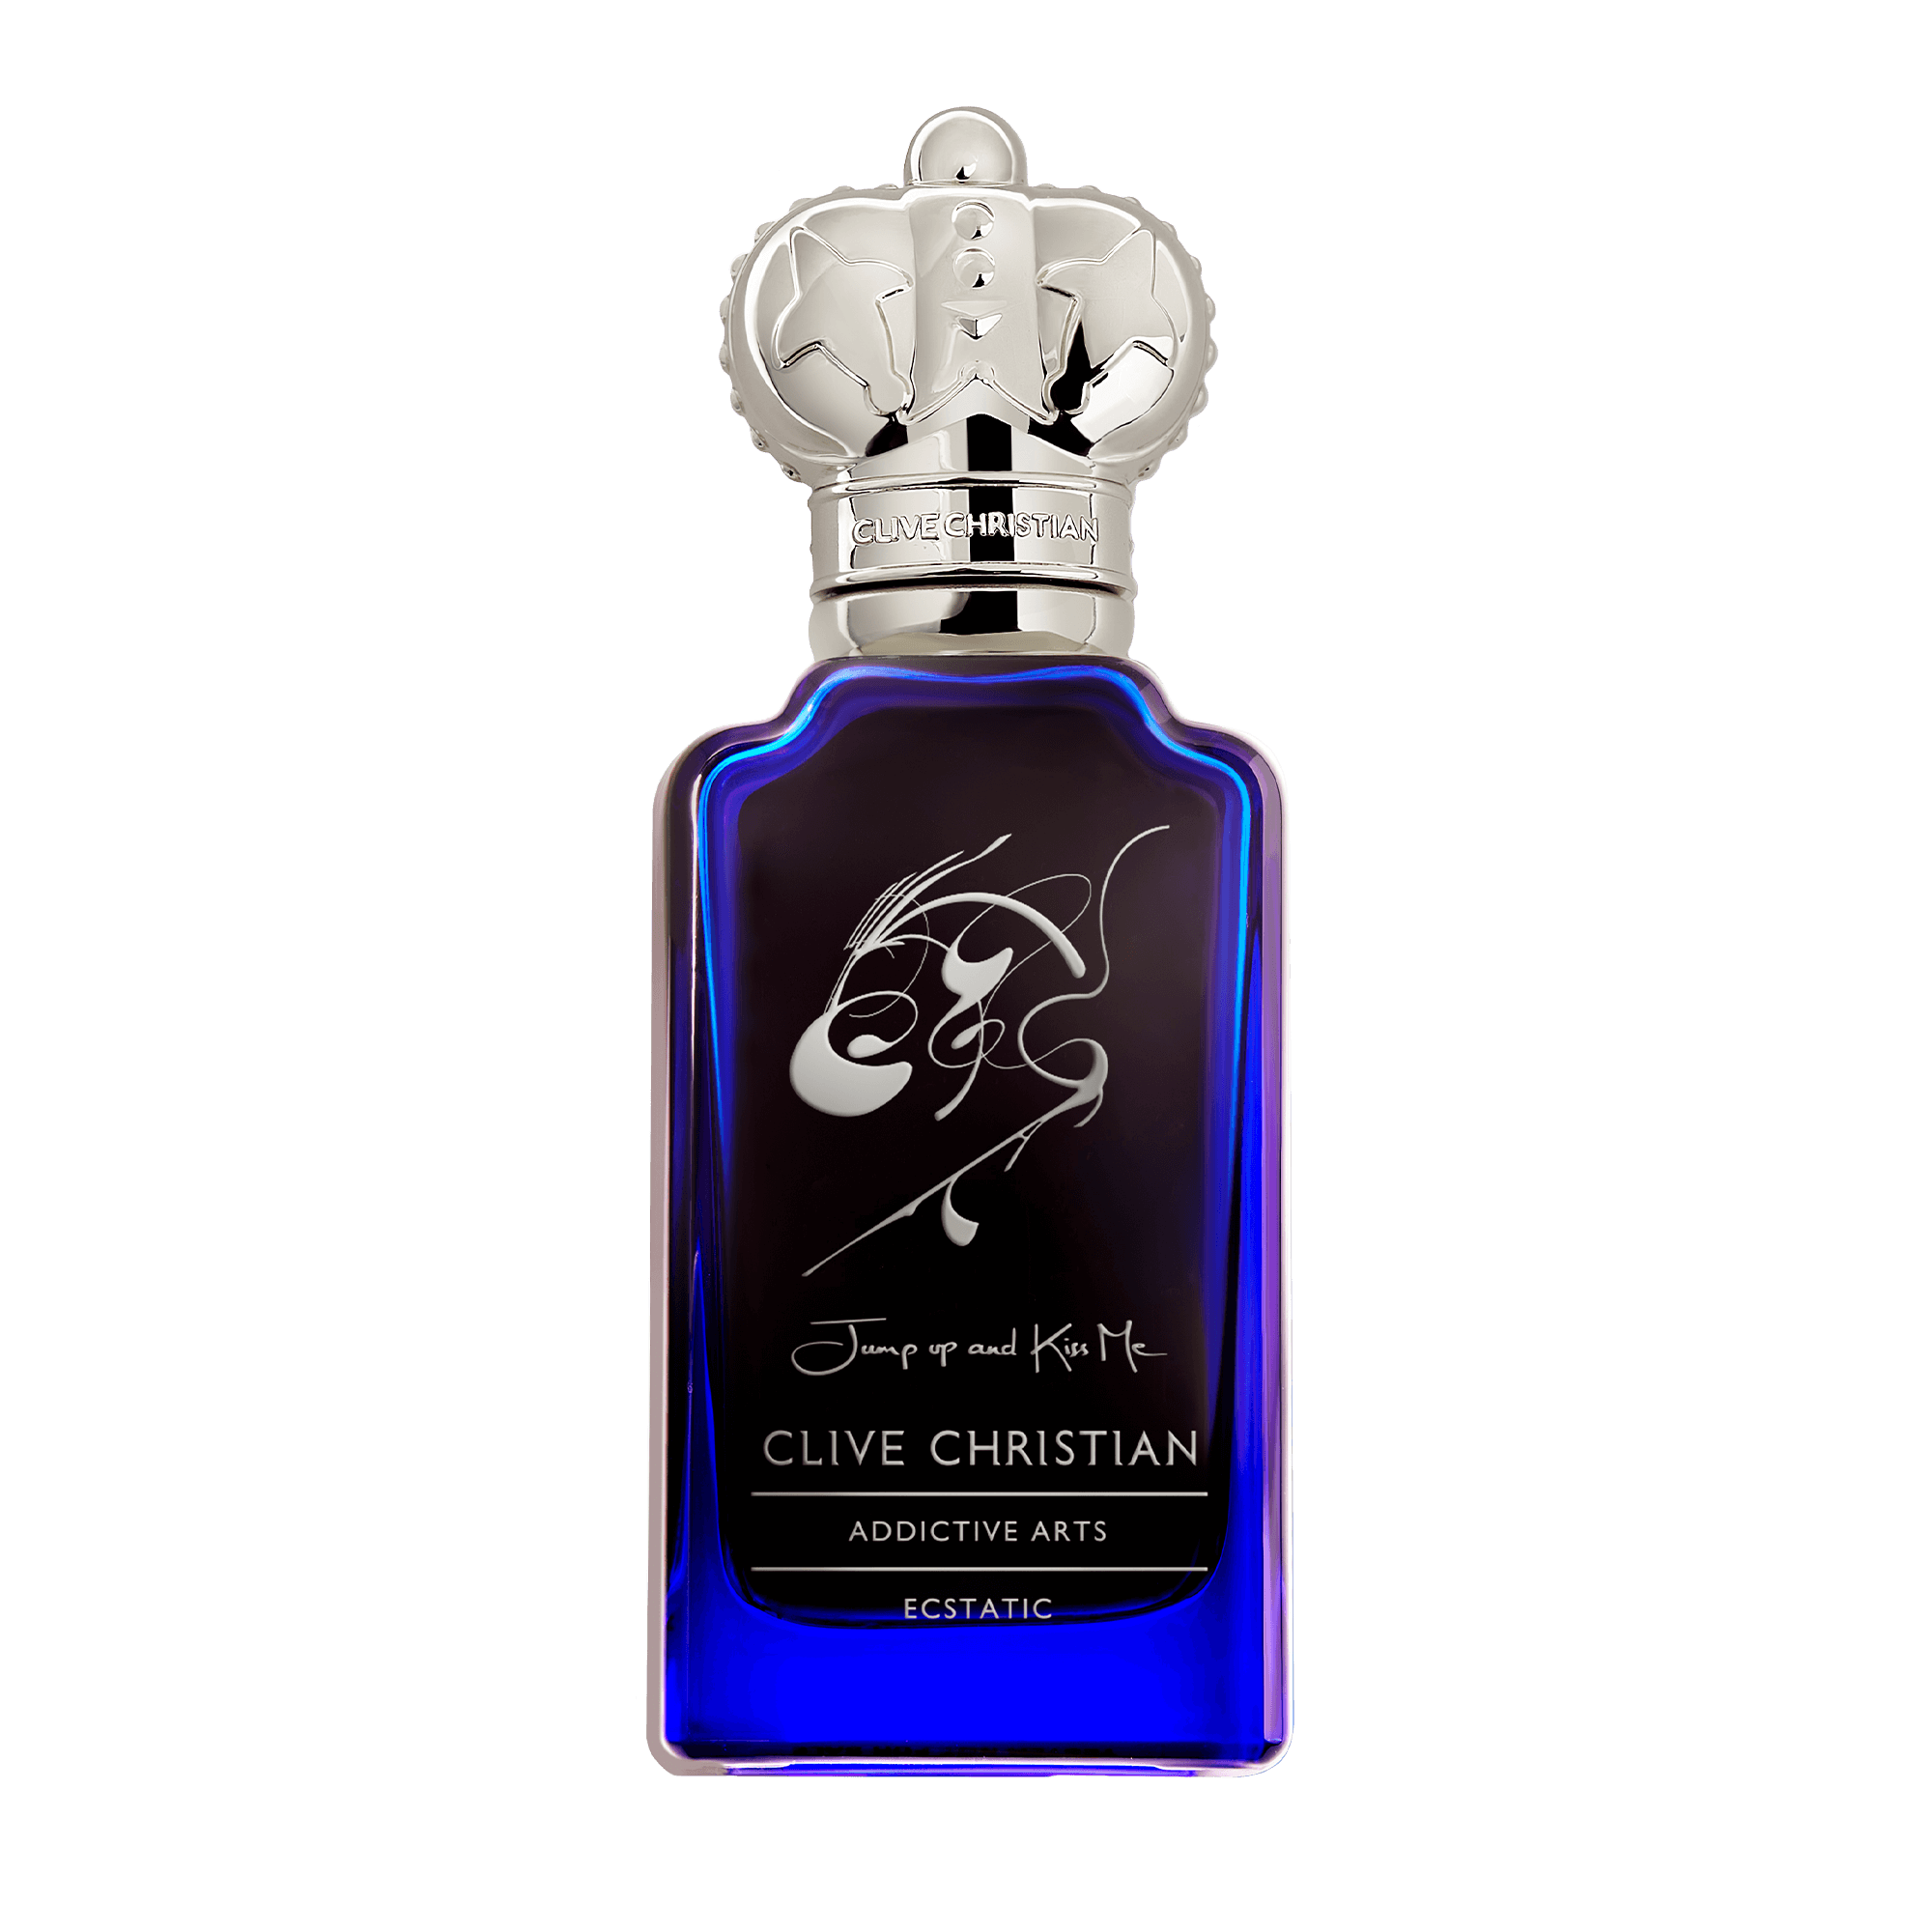 Clive Christian hedonistic. Clive Christian Jump up and Kiss me ecstatic 50 ml. Clive Christian hedonistic тестер. Парфюм гедонист клайв кристиан